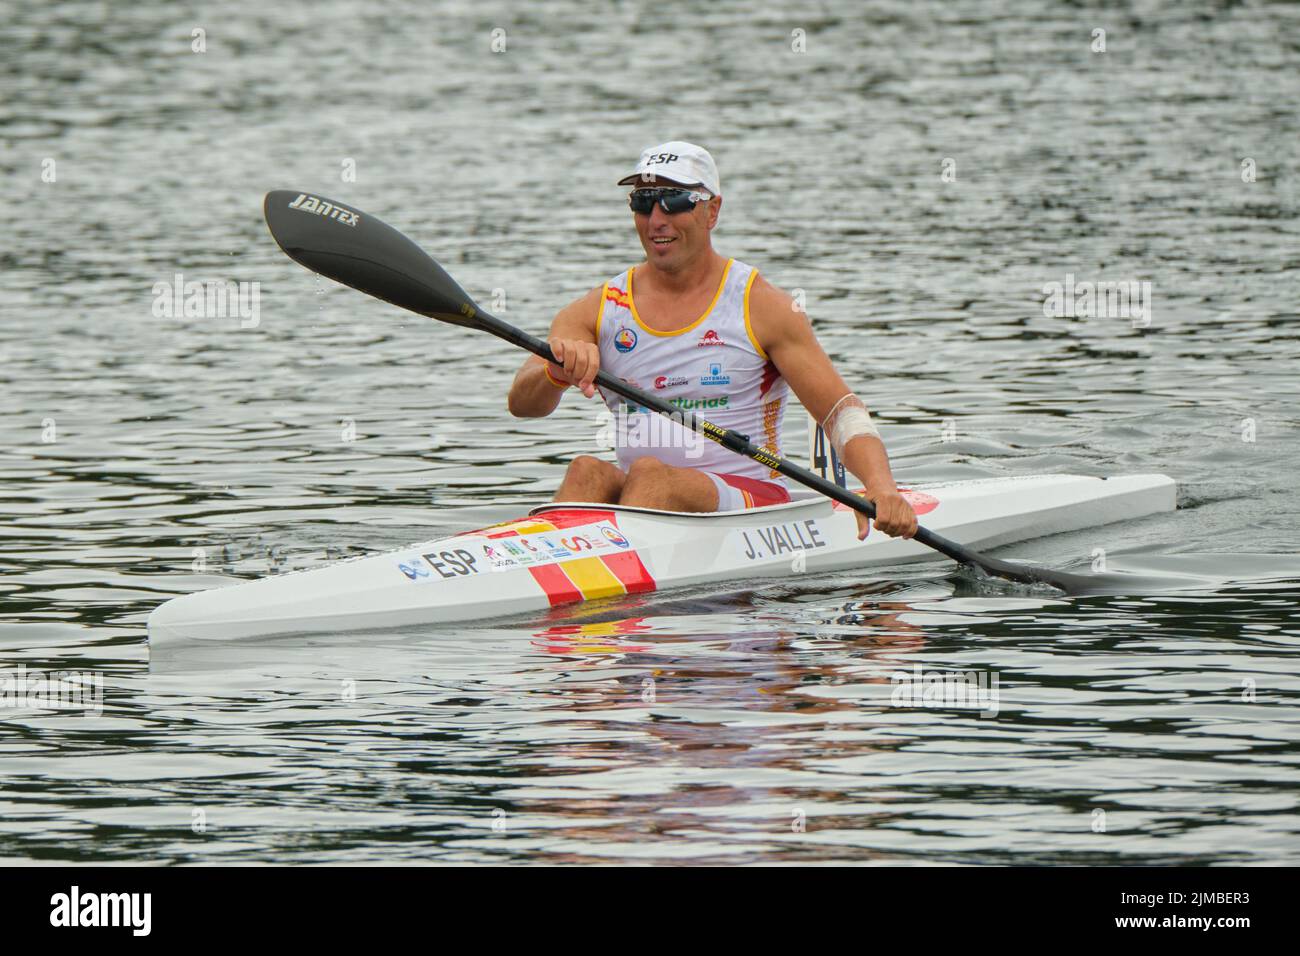 Dartmouth, Canada. August 5th, 2022 Juan Valle from Spain wins Gold in the Men Paracanoe KL3 200m World Championships in a photofinish with 0.08 seconds between Gold and Bronze. Robert Oliver from Great Britain takes Silver and Dylan Littlehales from Australia took bronze. The 2022 ICF Canoe Sprint and Paracanoe World Championships takes place on Lake Banook in Dartmouth (Halifax). Credit: meanderingemu/Alamy Live News Stock Photo